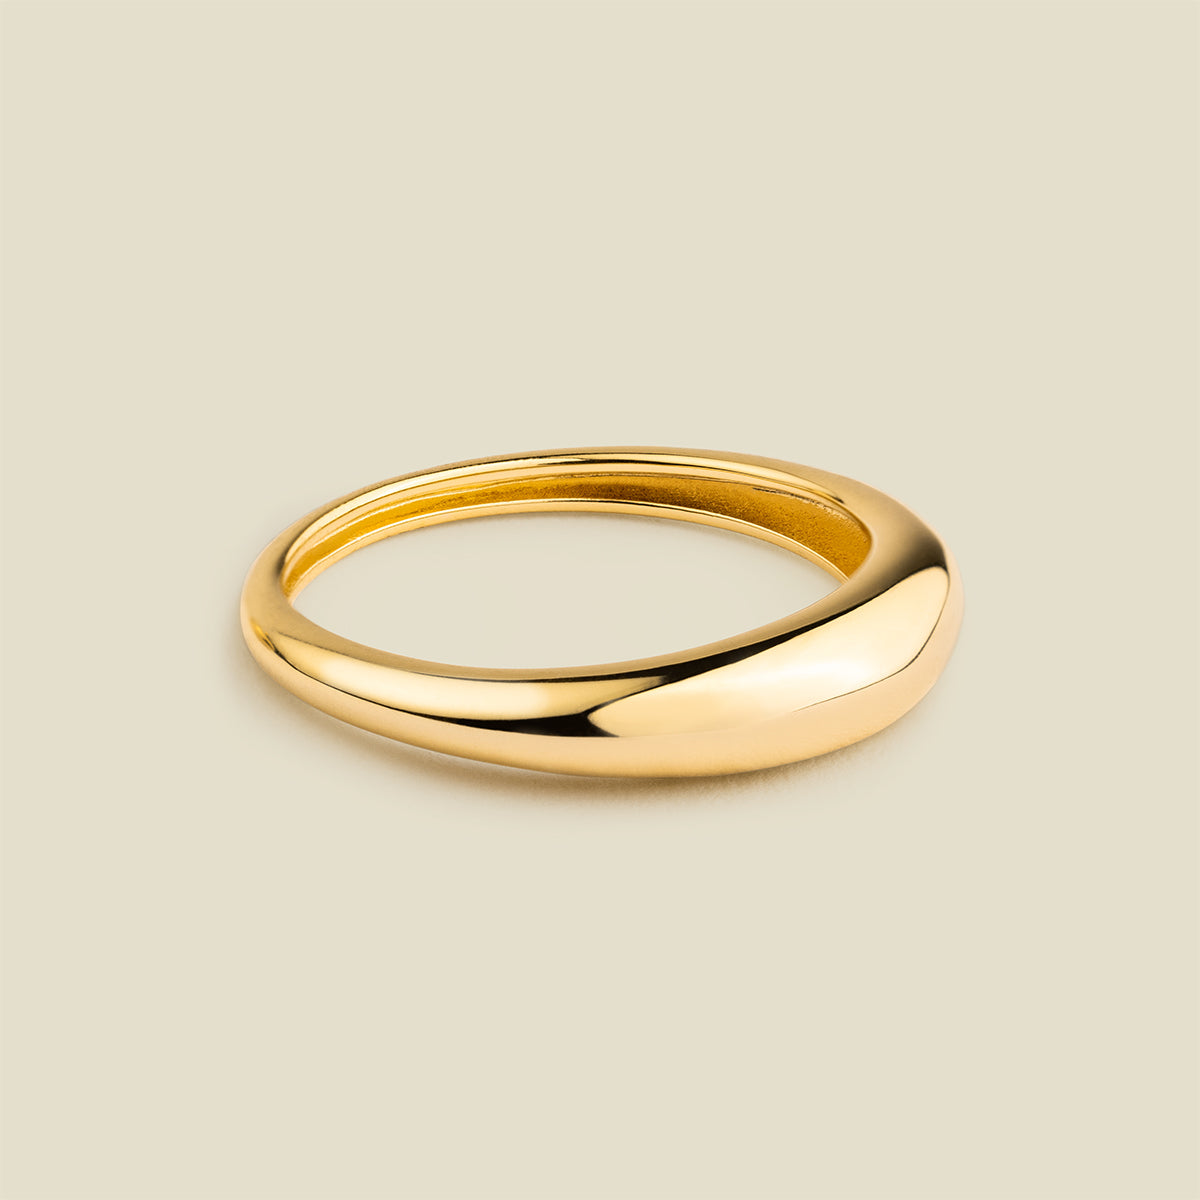 Candere by Kalyan Jewellers Diamond Ring 14kt Yellow Gold ring Price in  India - Buy Candere by Kalyan Jewellers Diamond Ring 14kt Yellow Gold ring  online at Flipkart.com